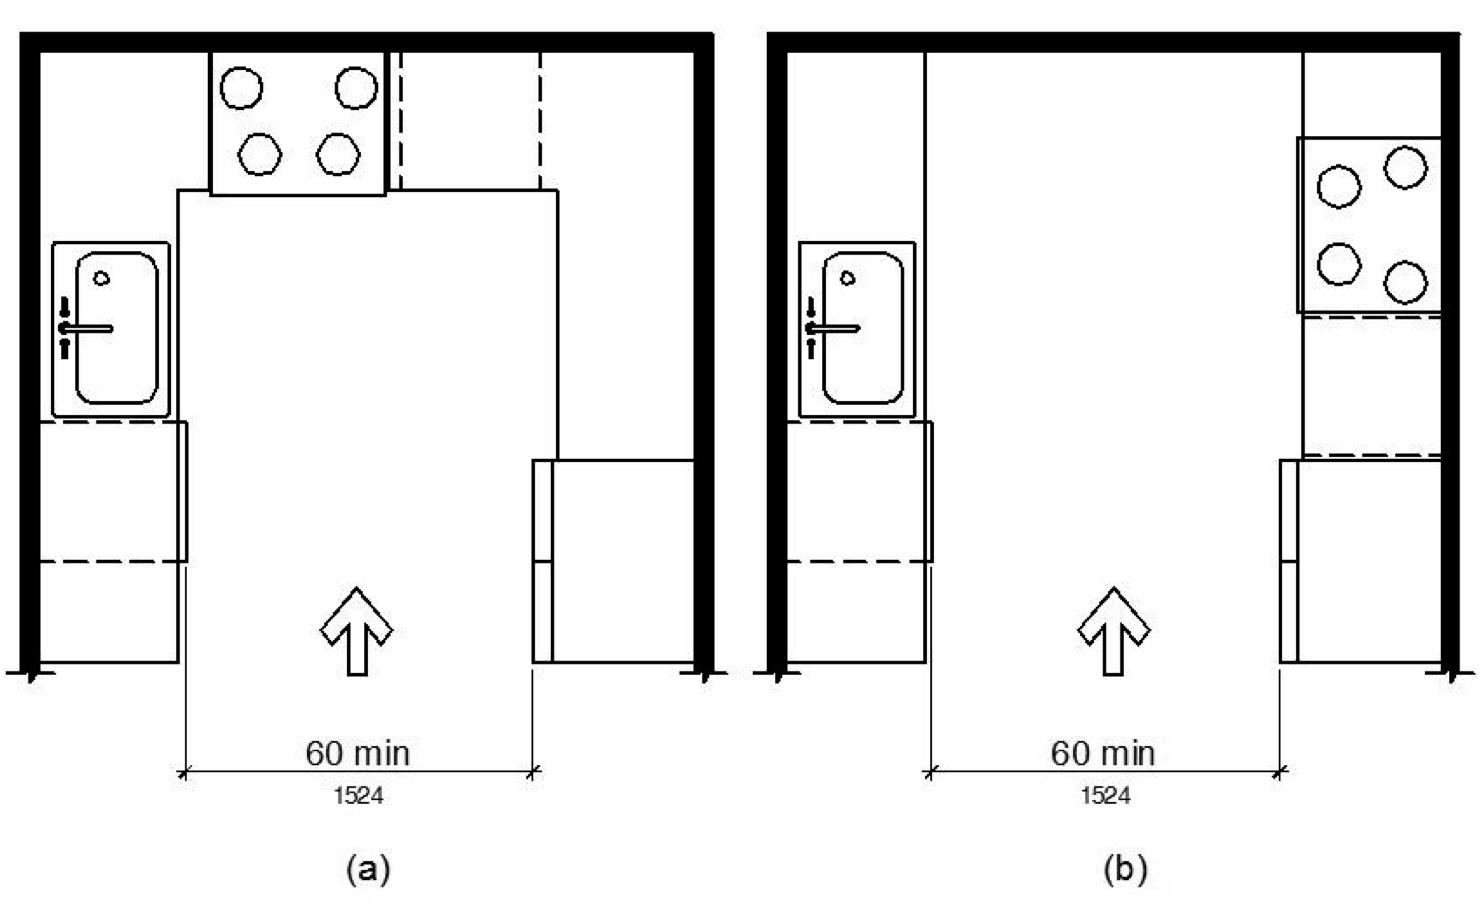 Figure (a) is a plan view of a kitchen with appliances and cabinets on three sides.  Figure (b) is a plan view of a kitchen with appliances and cabinets on two opposites with a wall at the rear.  The width of the kitchen entry opening is 60 inches minimum.
